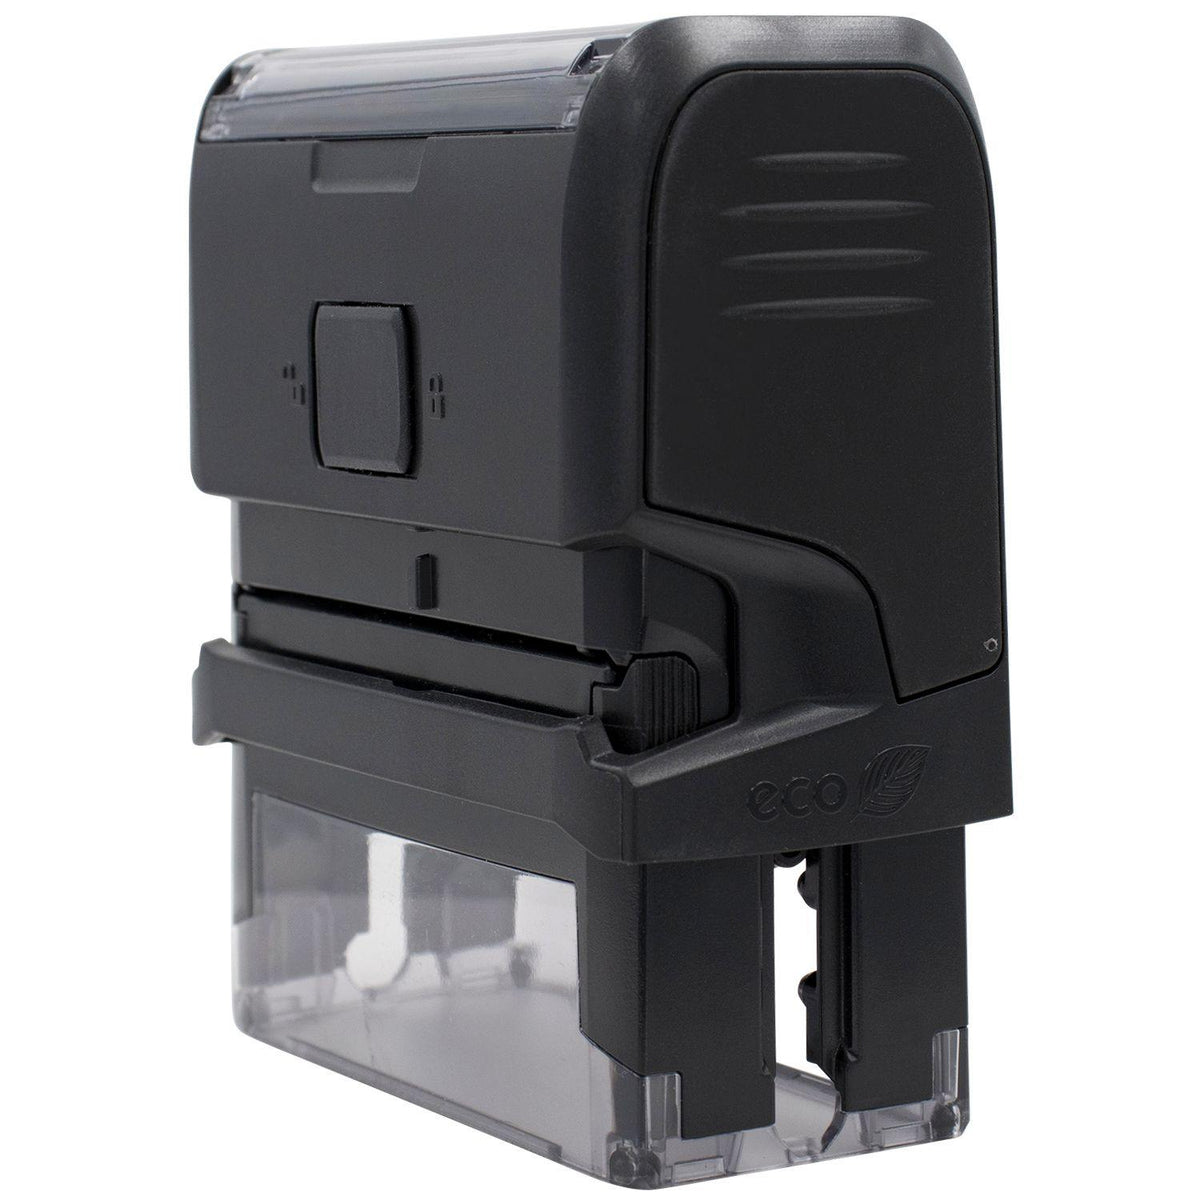 Side View of Large Self-Inking Bold Draft Stamp at an Angle